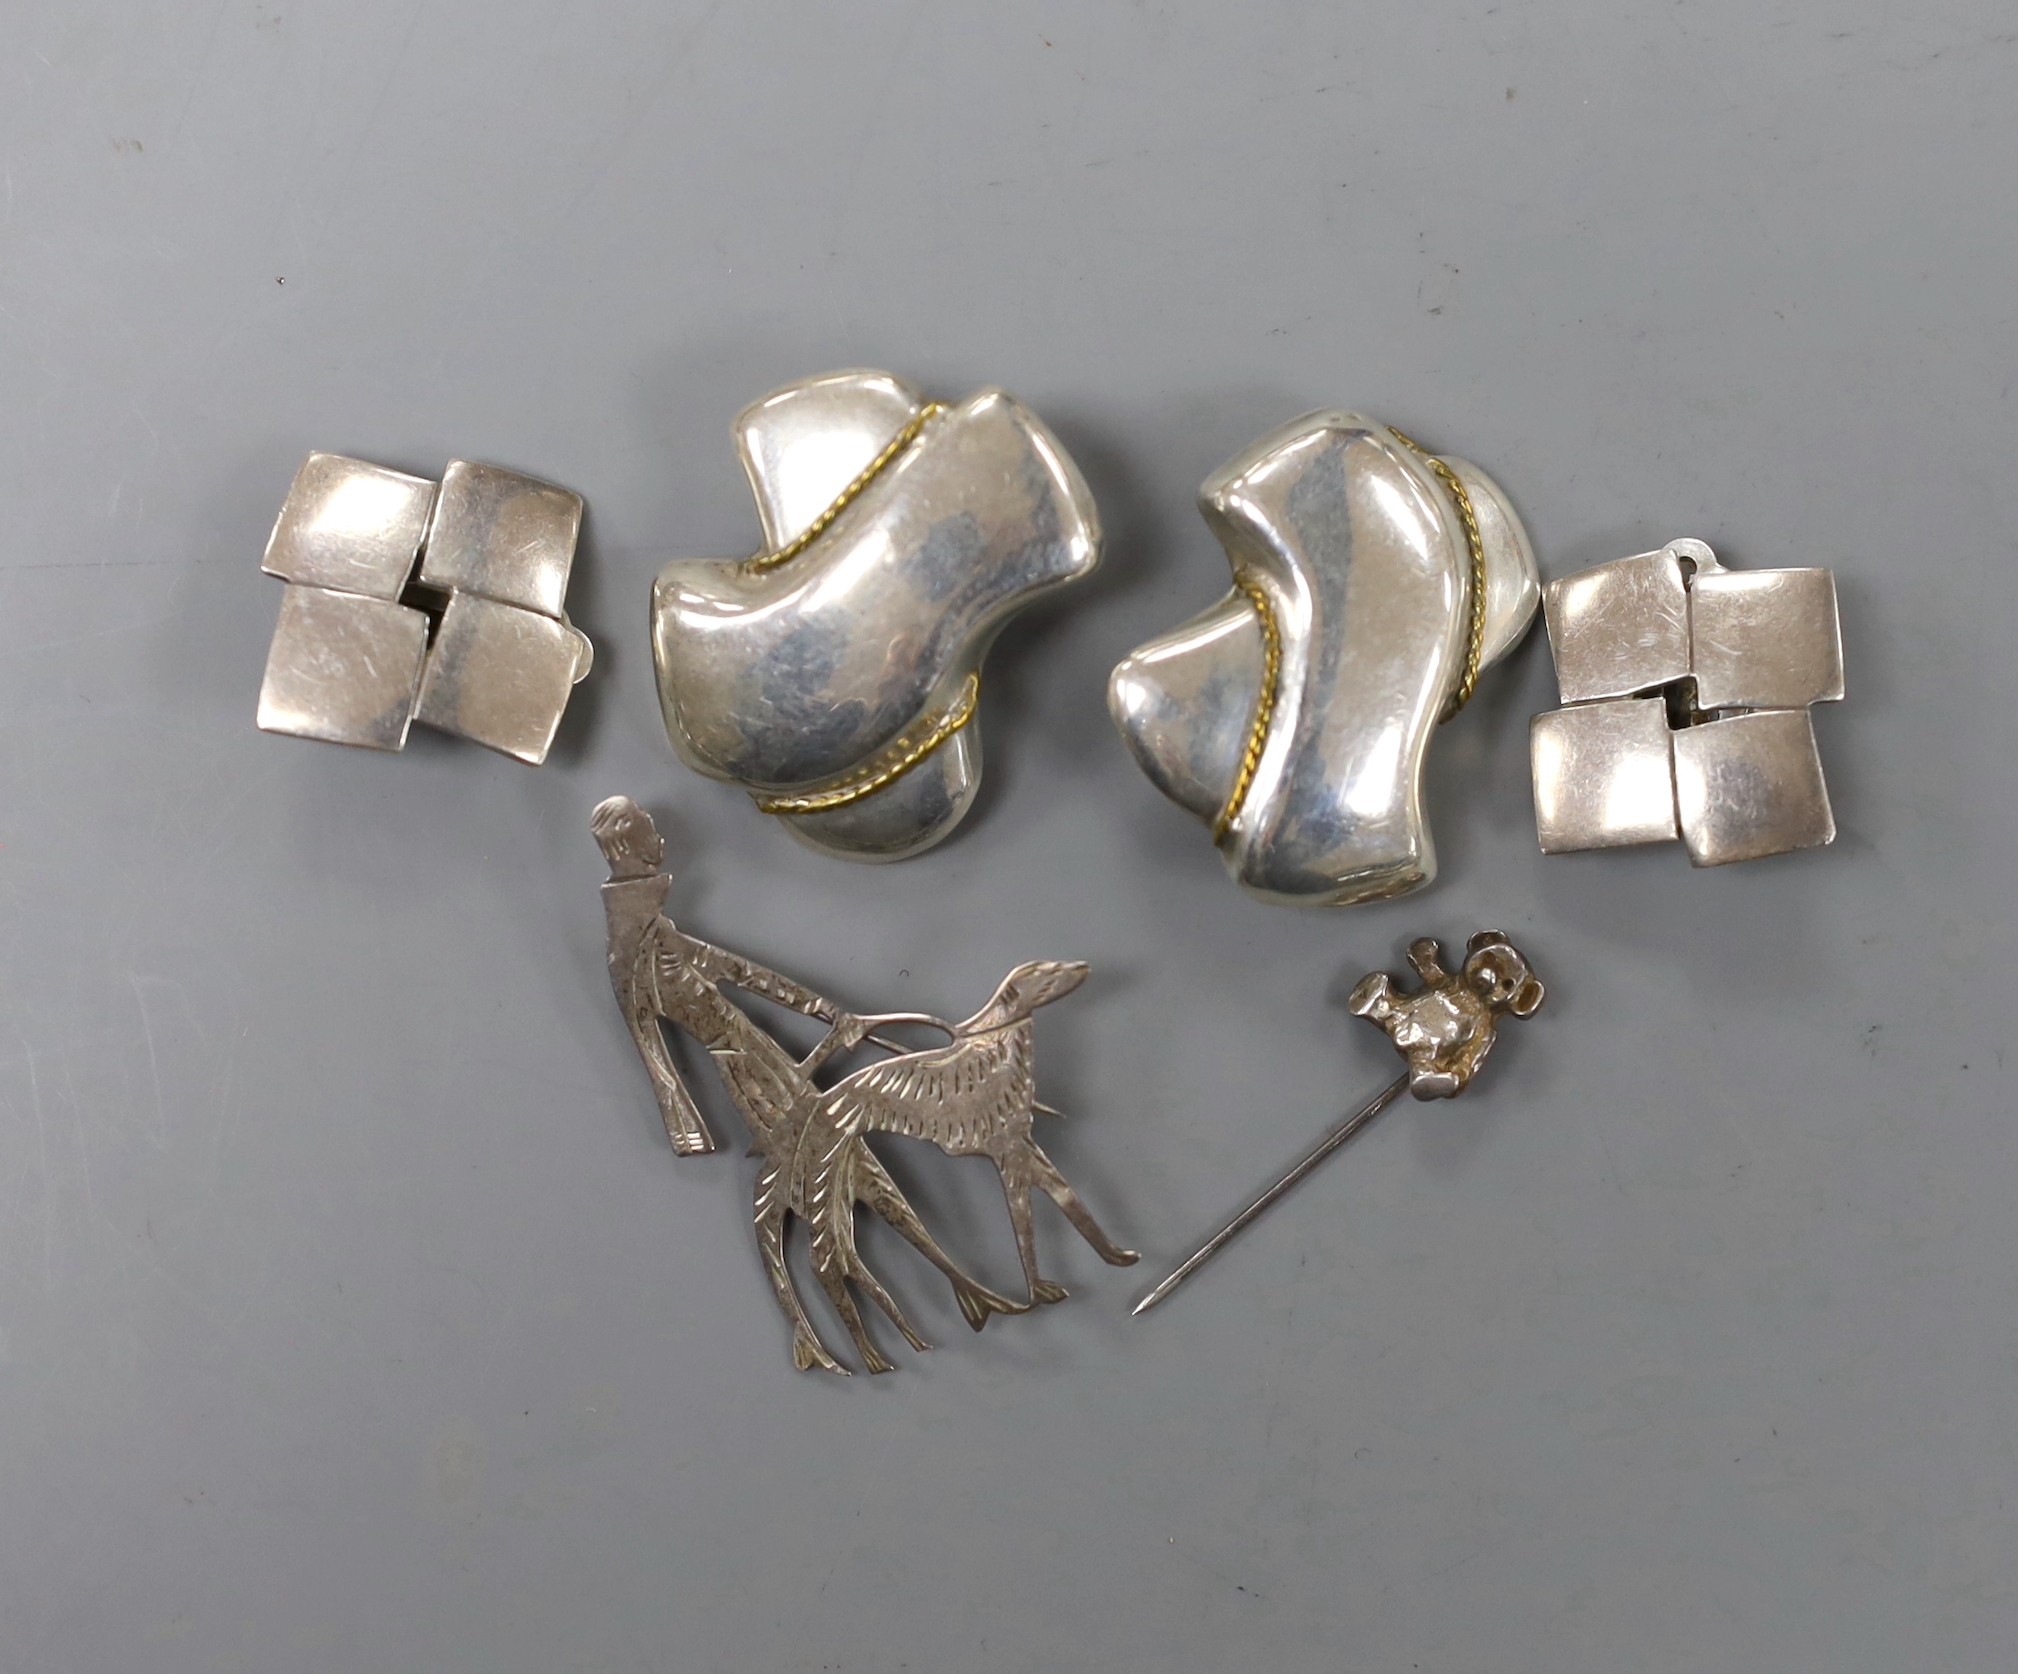 Sterling jewellery to include two pairs of earrings, a brooch and a tiepin.